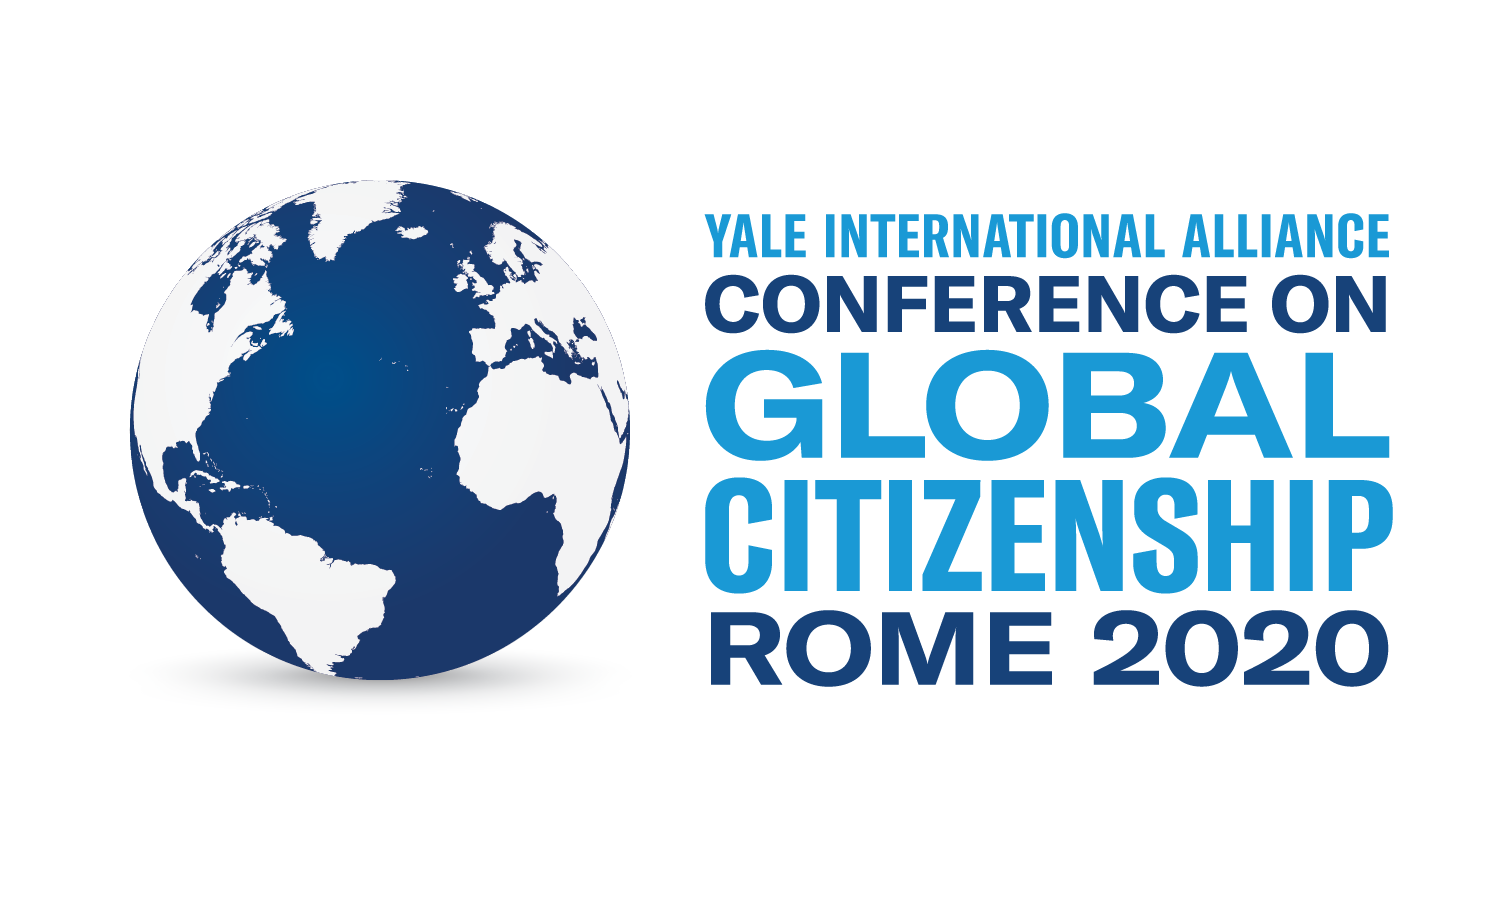 YIA Conference on Global Citizenship Rome 2020 logo